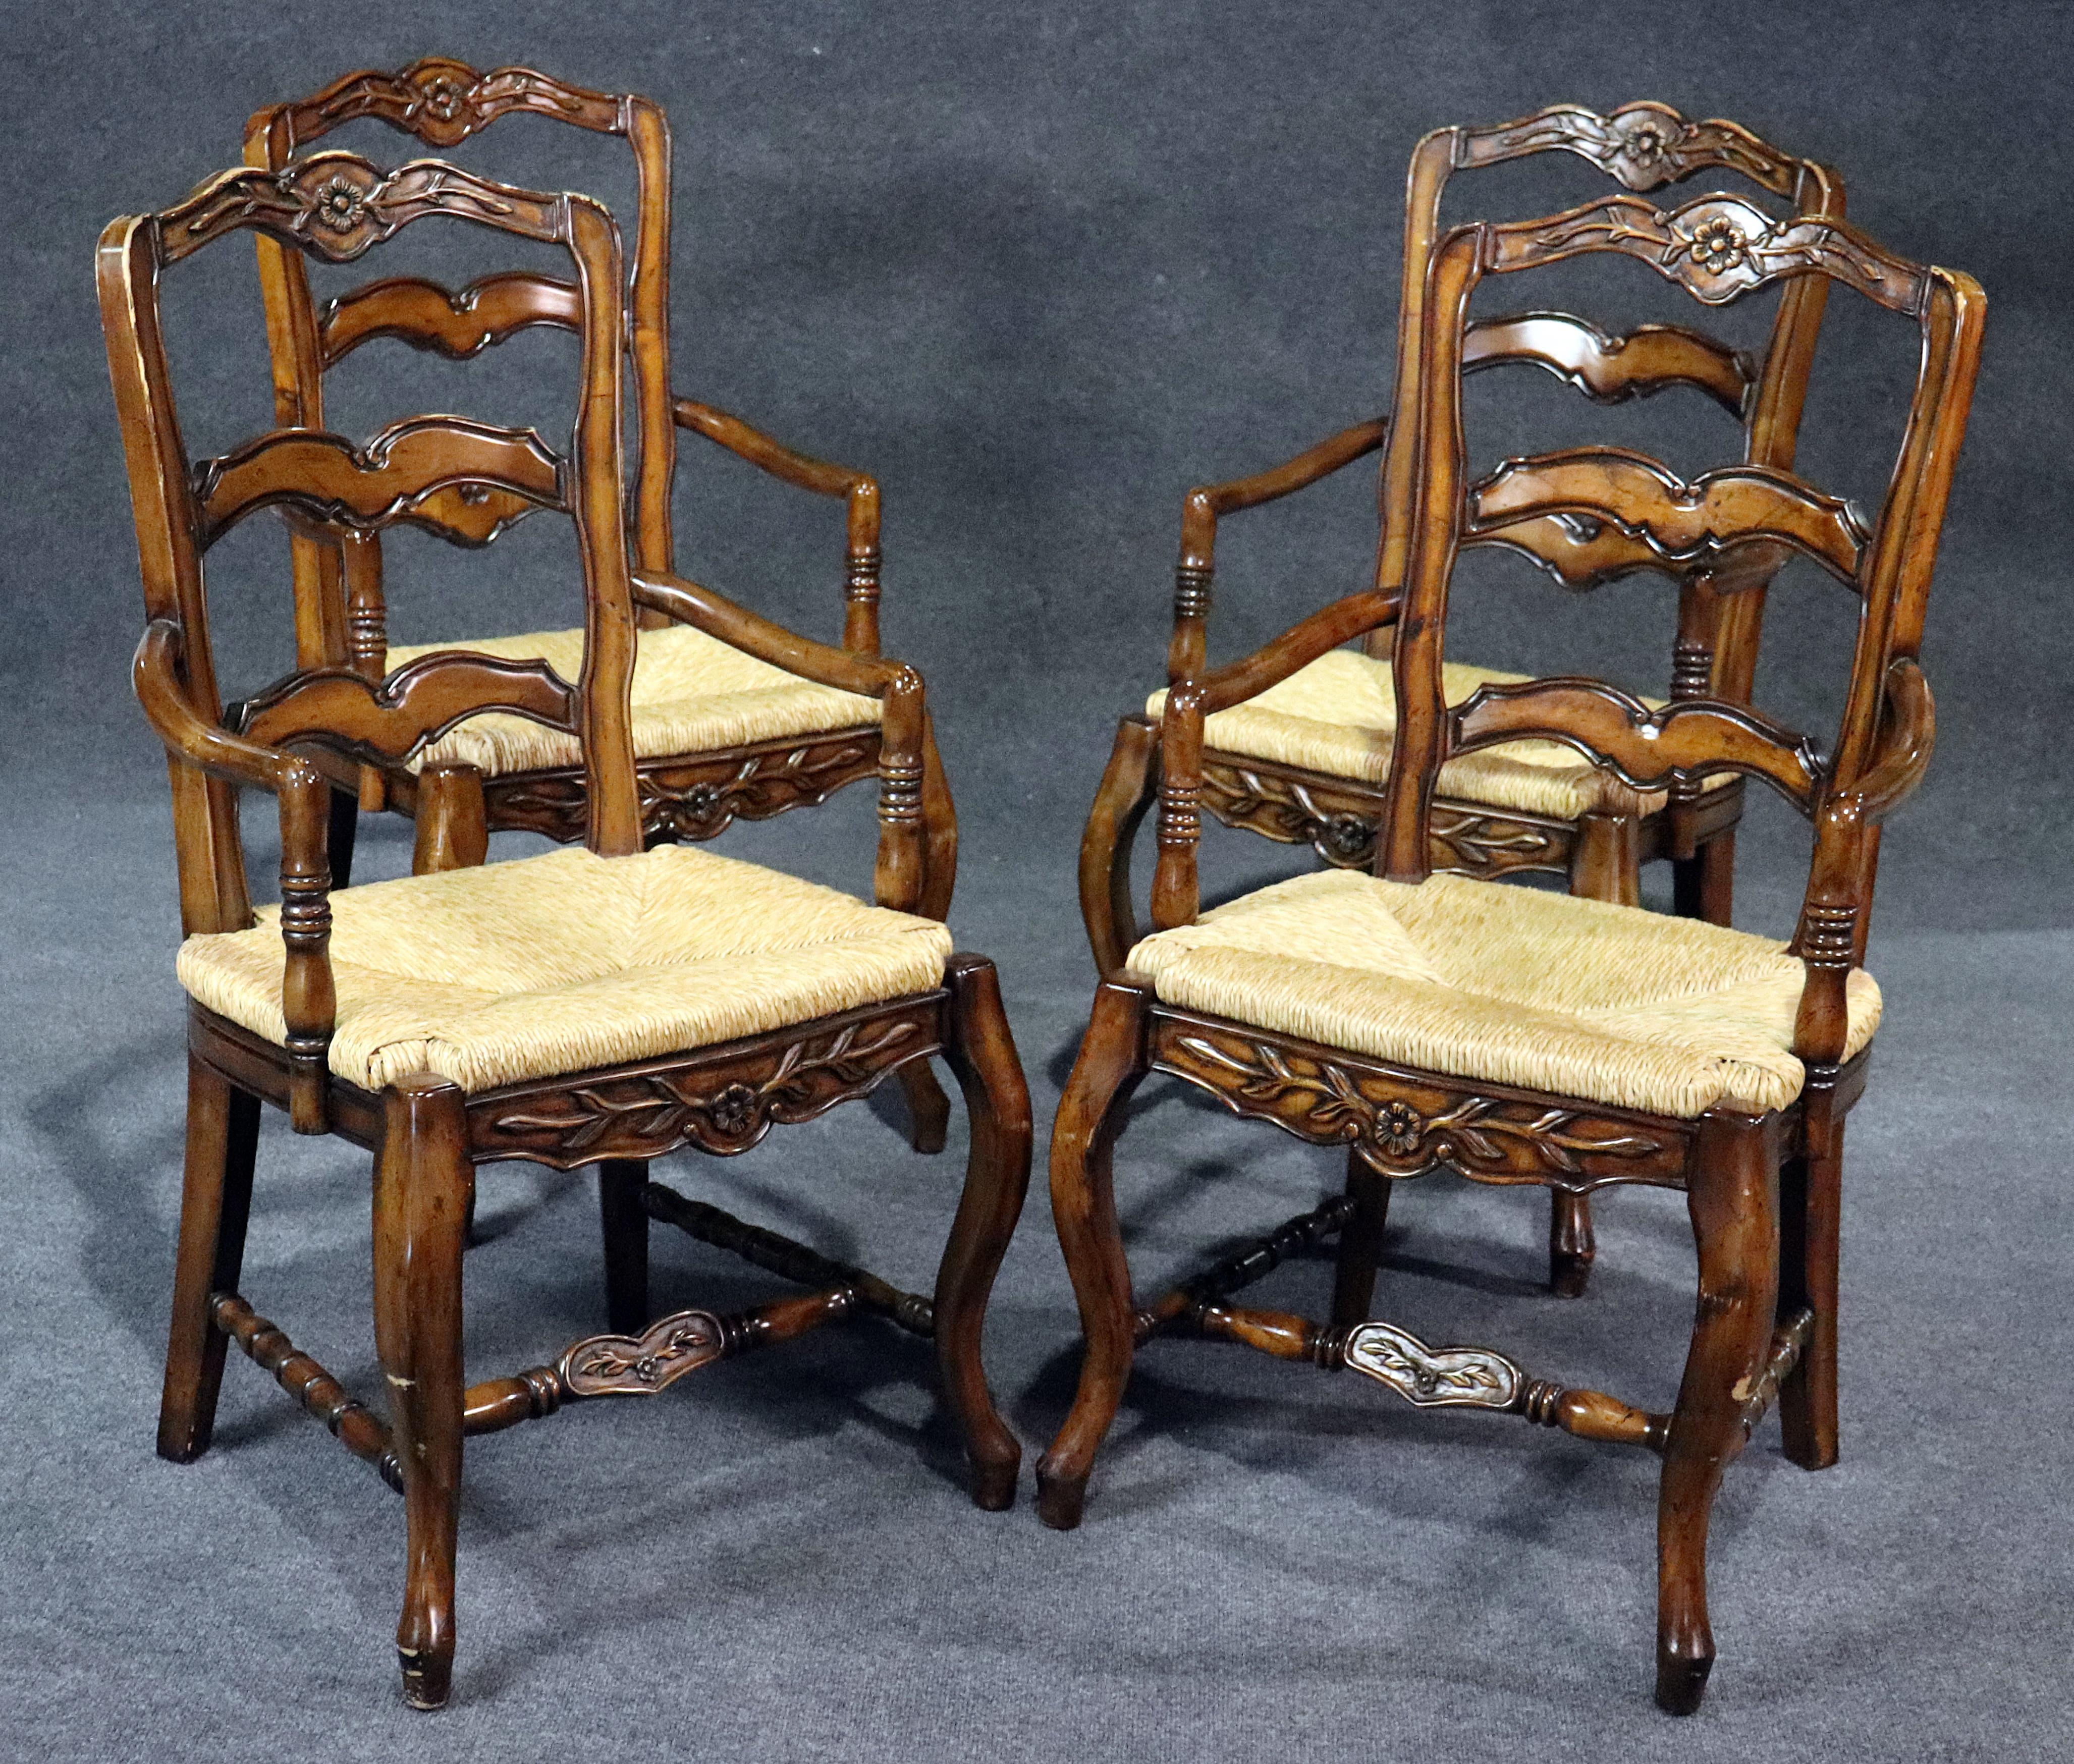 Set of 4 walnut country French style distressed dining room armchairs with rush seats.